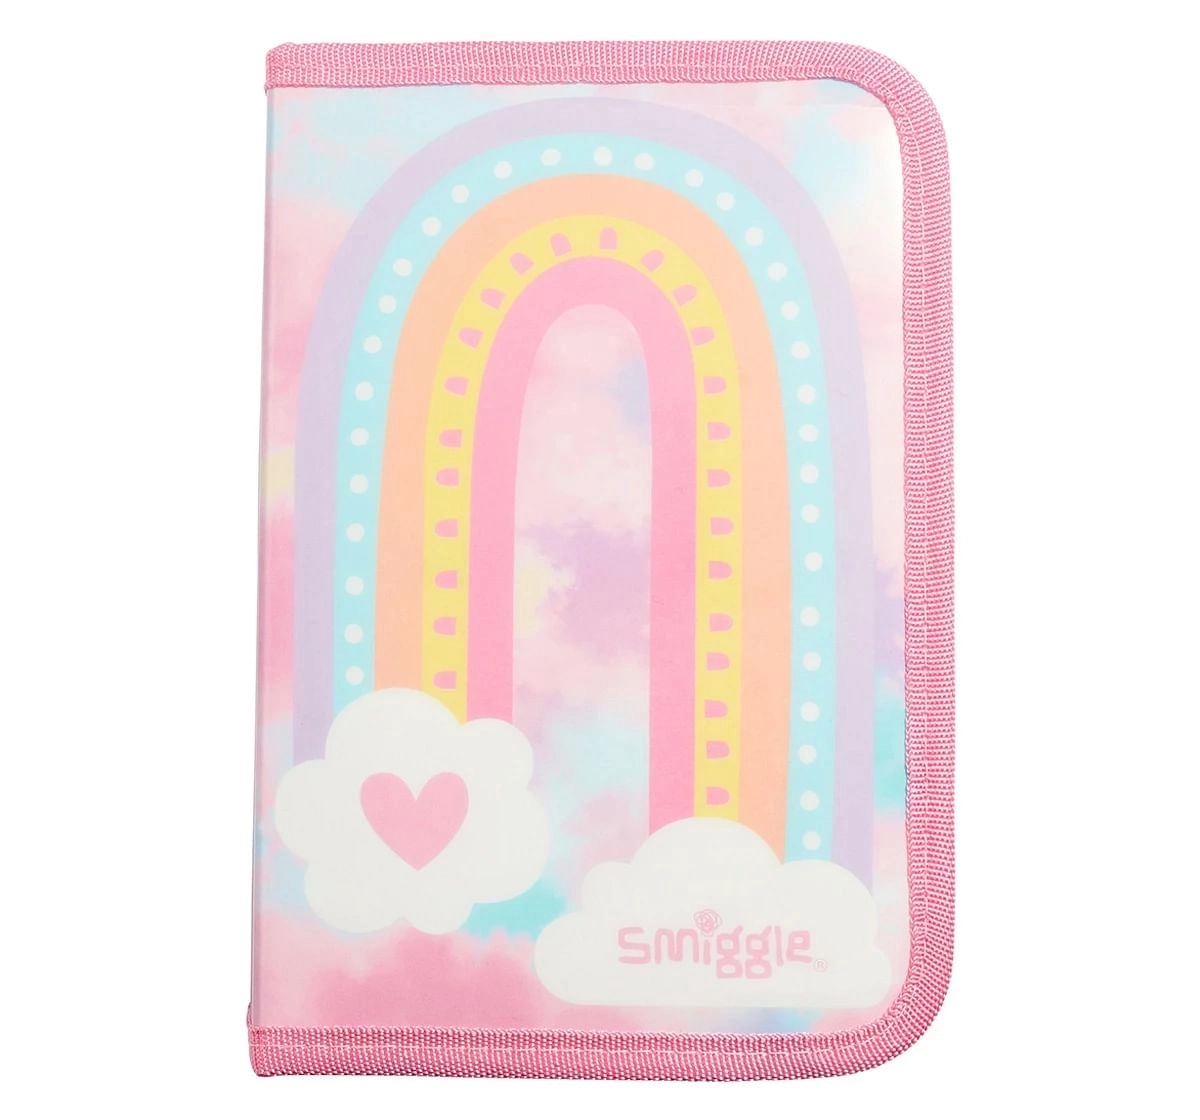 Smiggle Bright Side Midi Stationery Kit for Kids 3Y+, Pink